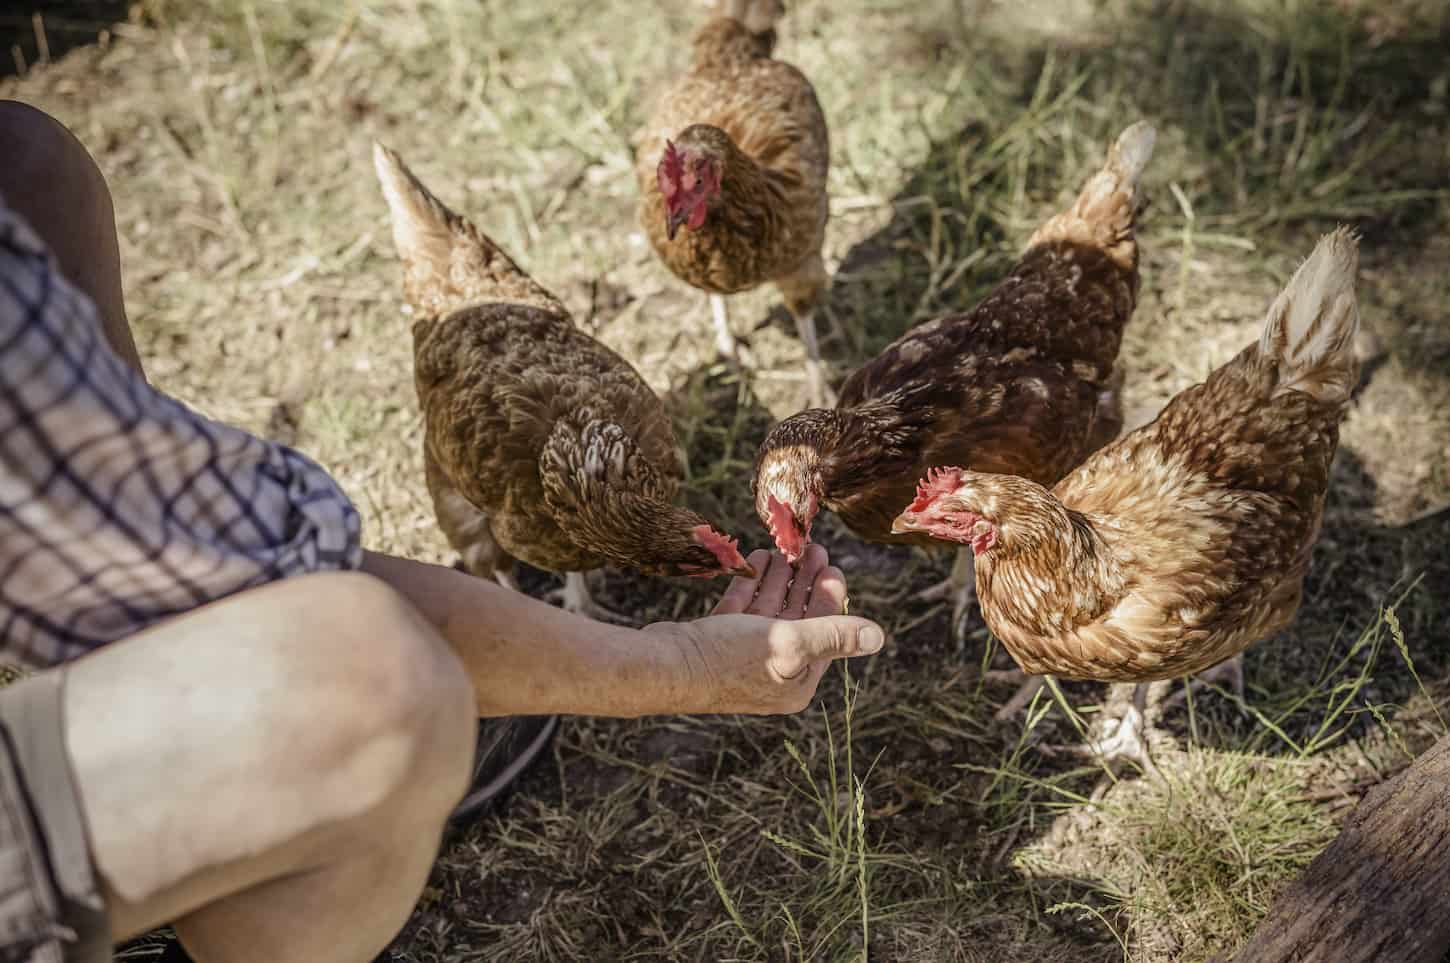 An image of a man feeding four chickens in the farm.